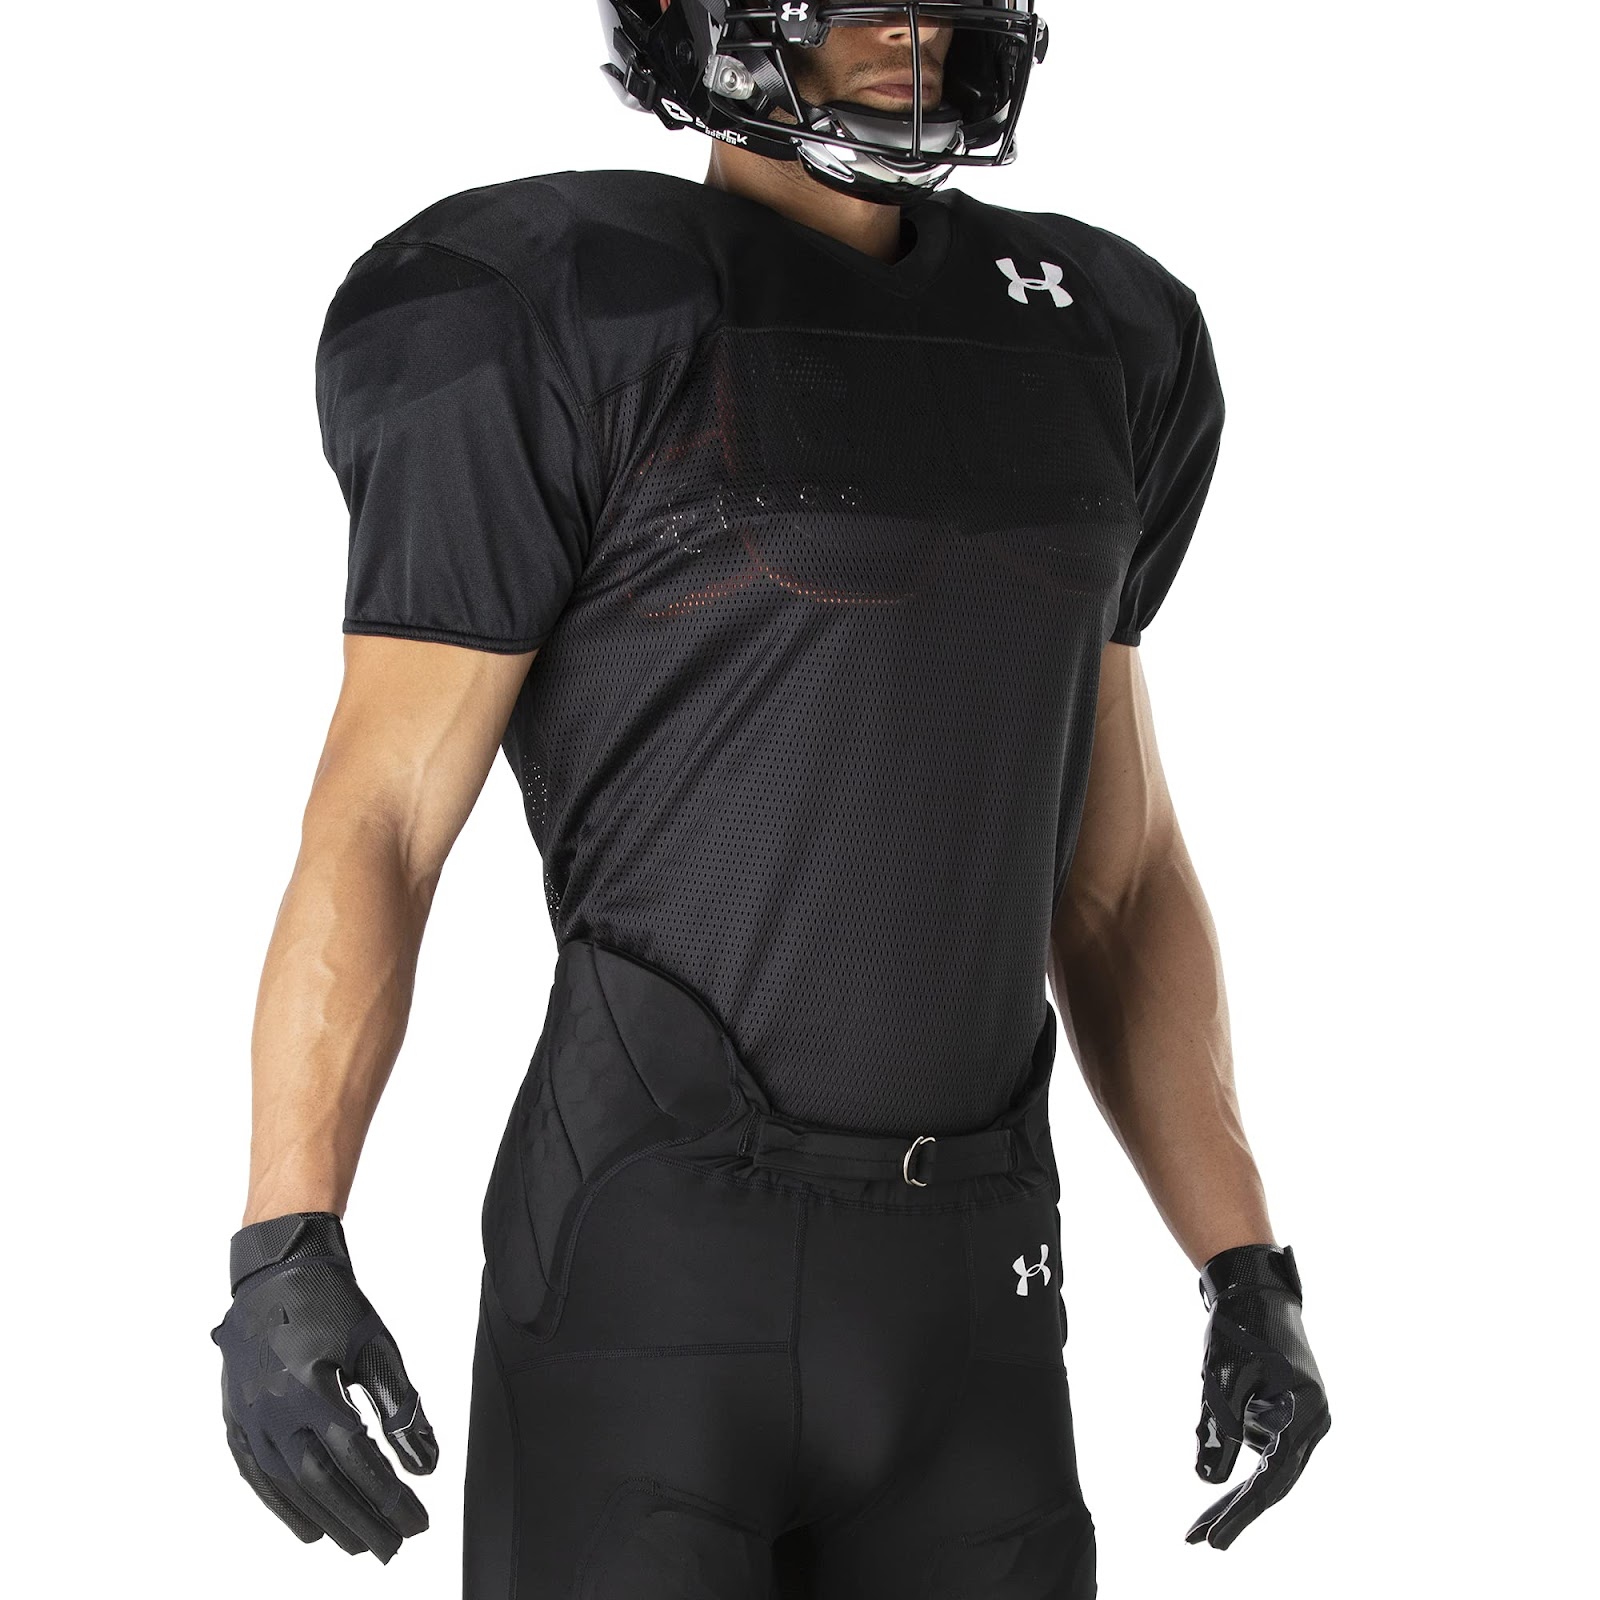 UNDER ARMOUR Adult Practice Jersey Small Black